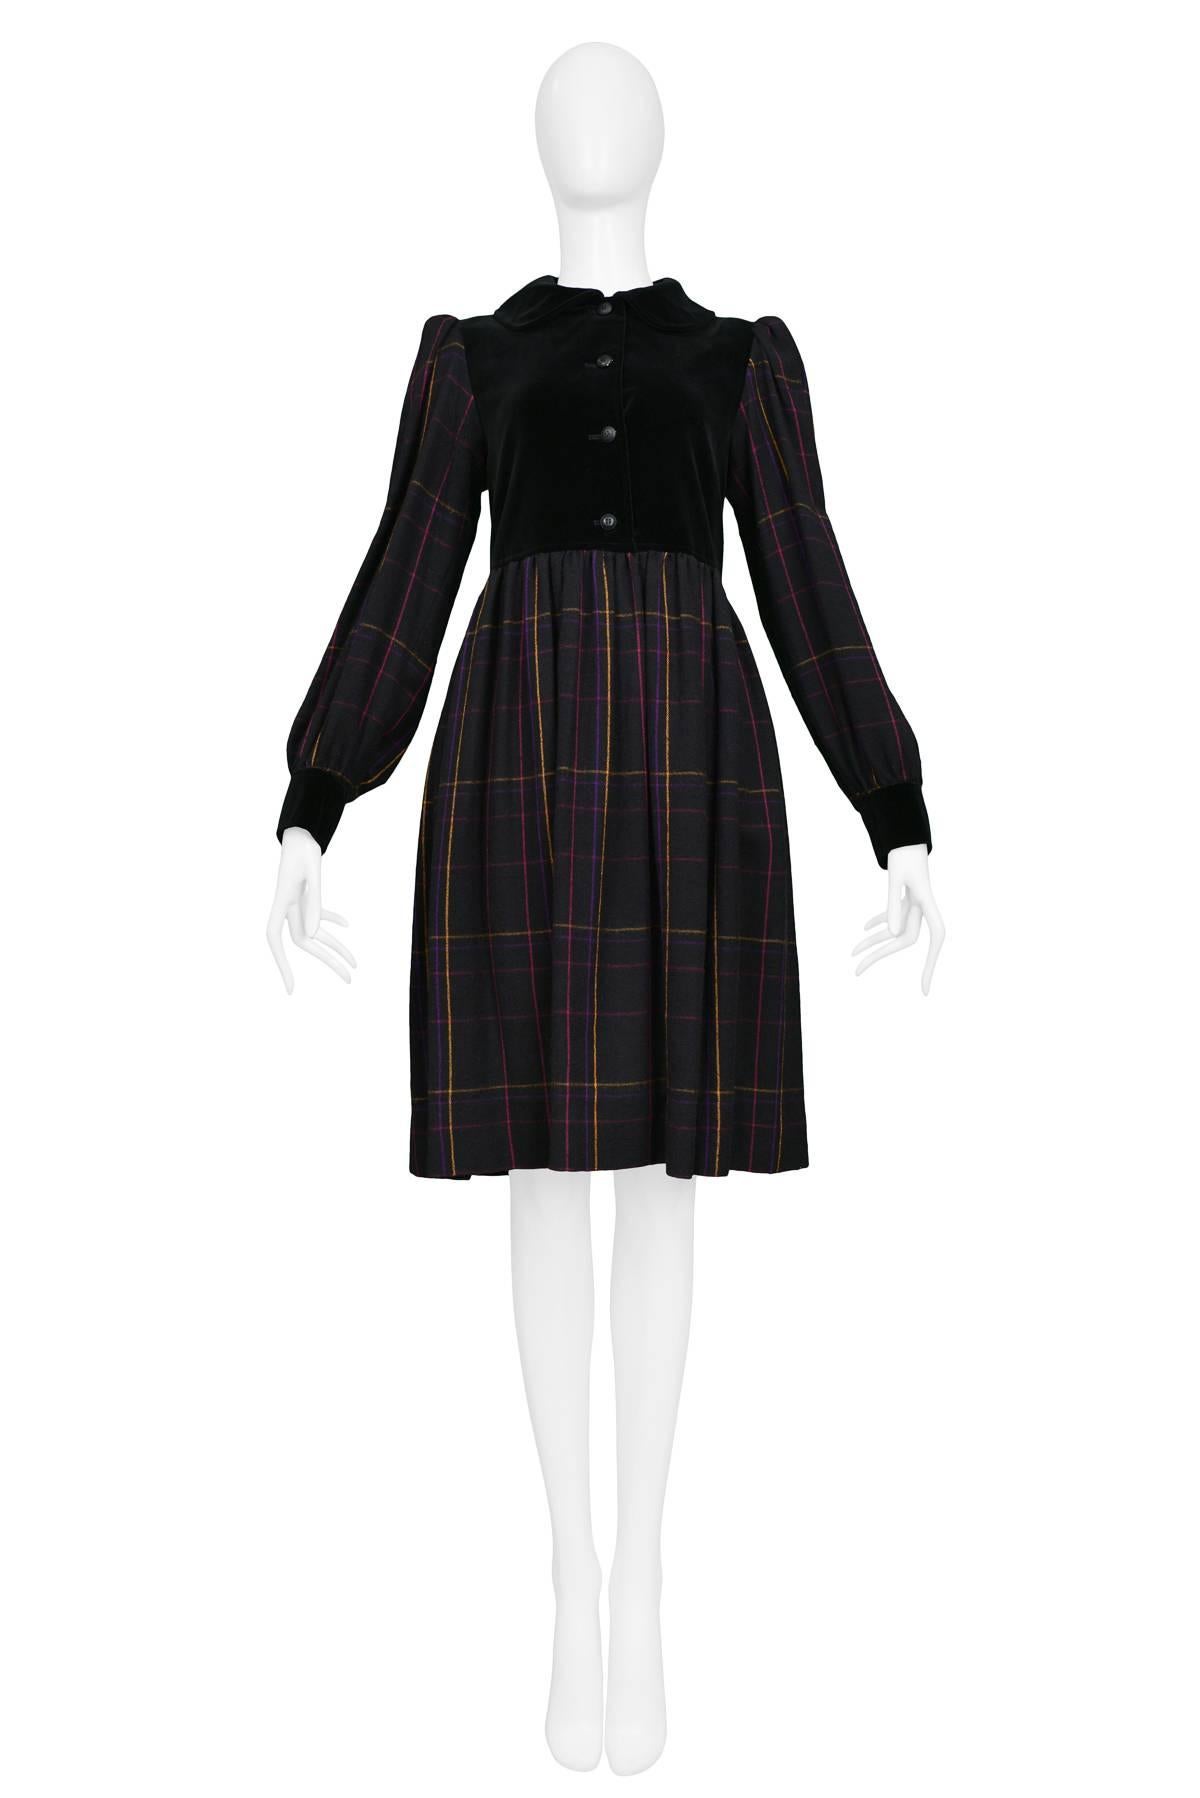 Resurrection Vintage is excited to offer a vintage Yves Saint Laurent black plaid wool dress with magenta, orange, and purple windowpane details. The dress features a black velvet button-front yoke and matching peter pan collar and cuffs. Circa